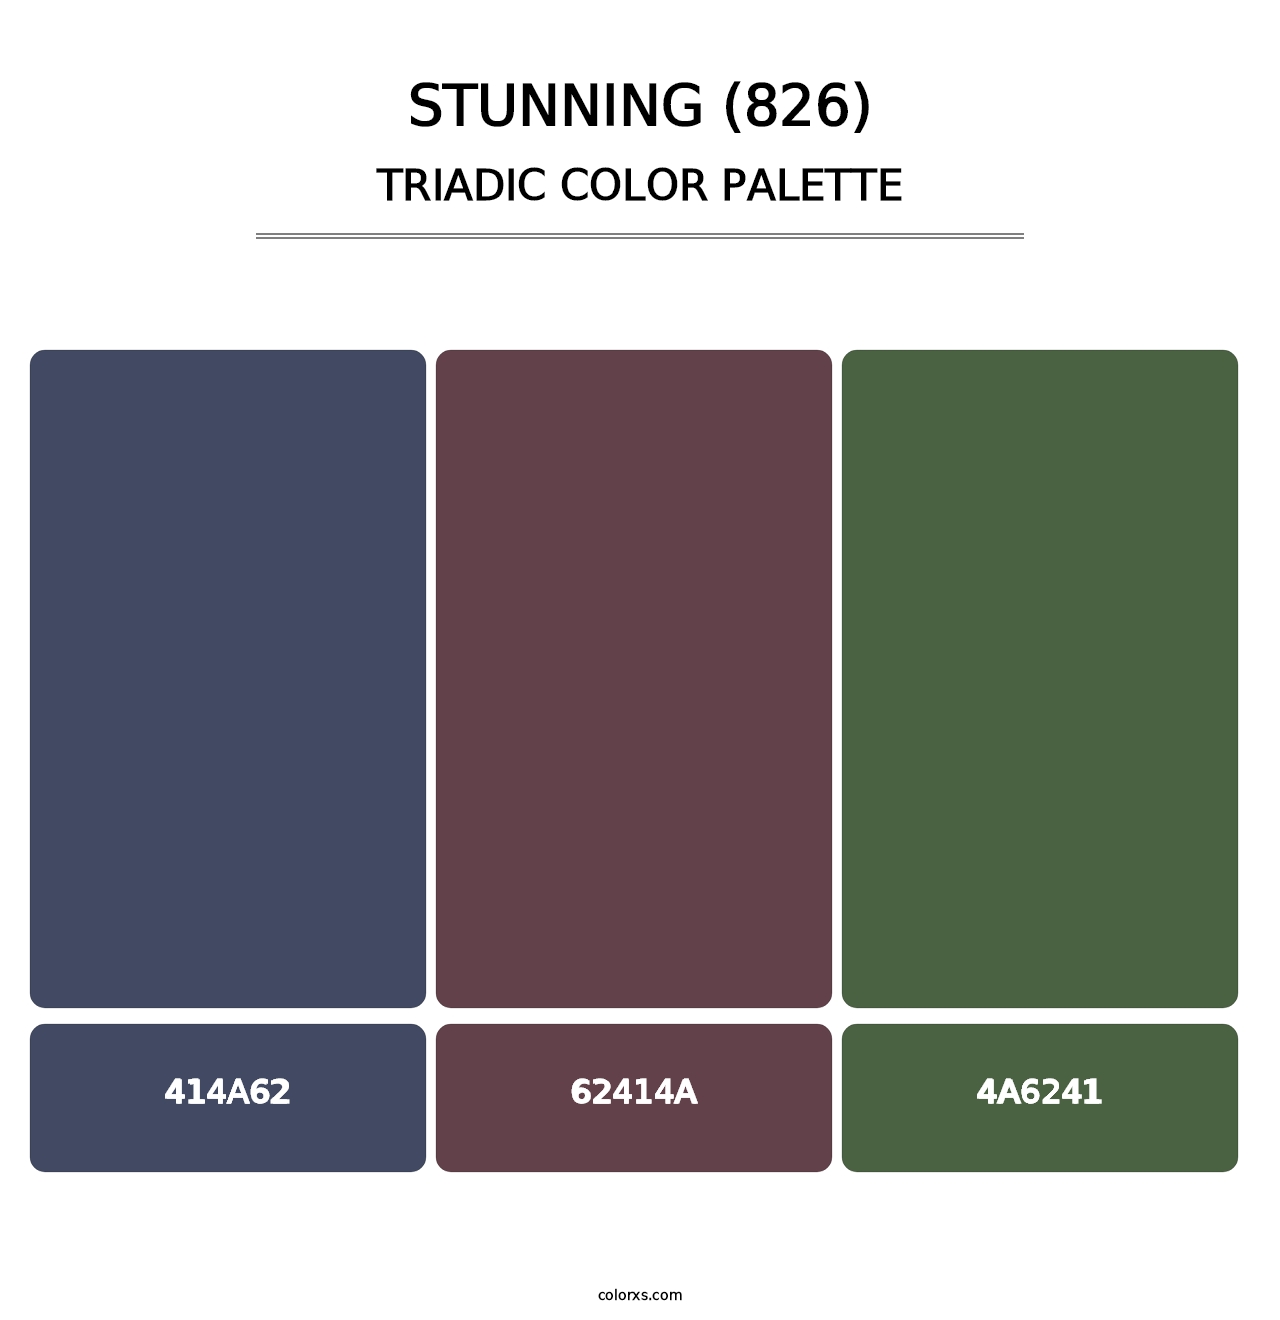 Stunning (826) - Triadic Color Palette